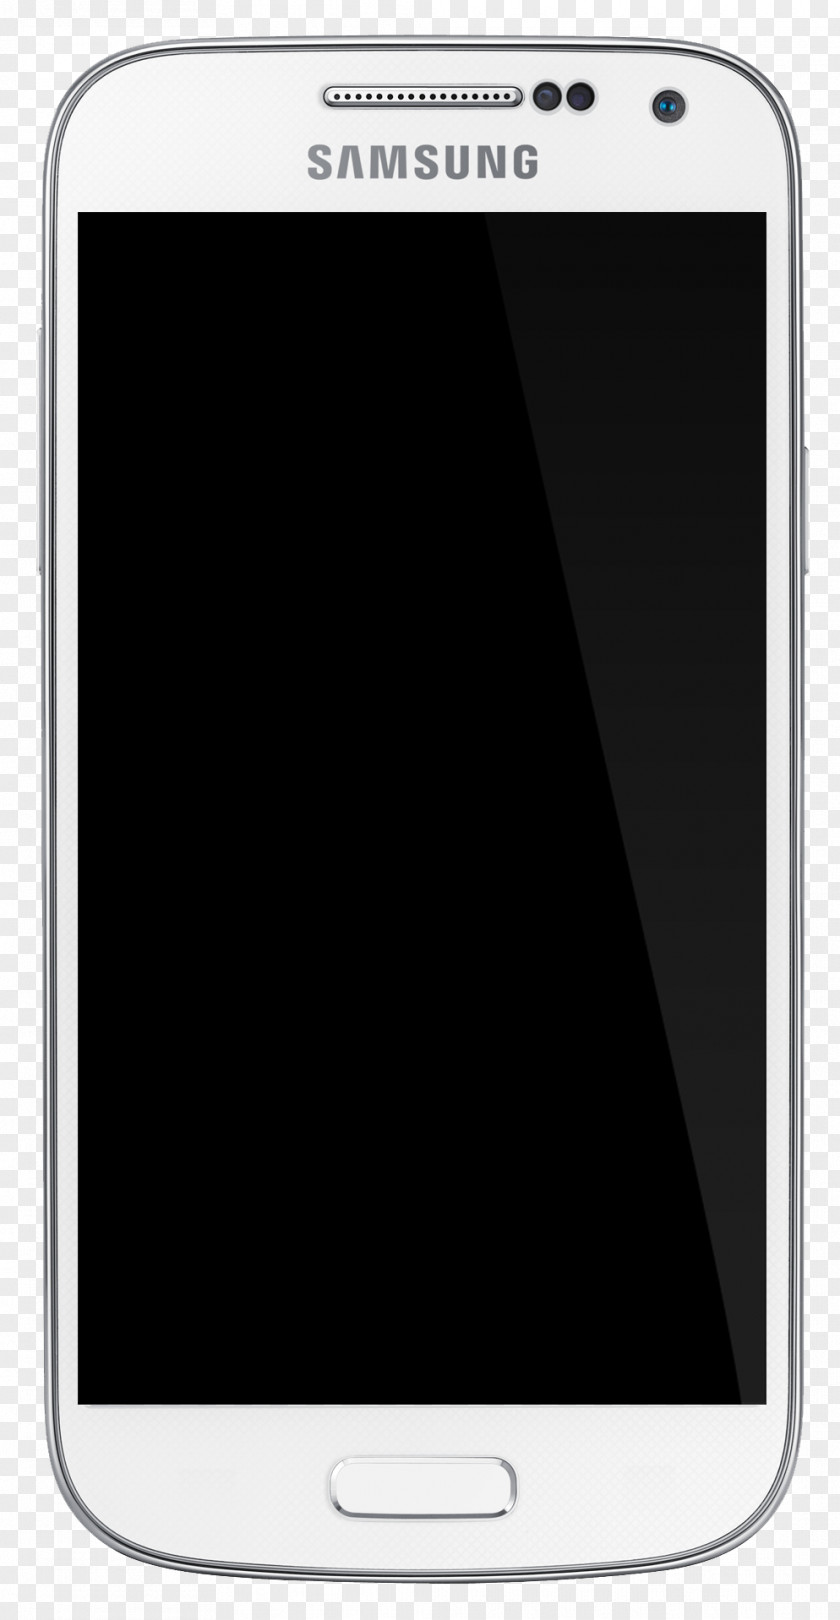 Samsung Galaxy Tab 4 7.0 Note Android Smartphone PNG